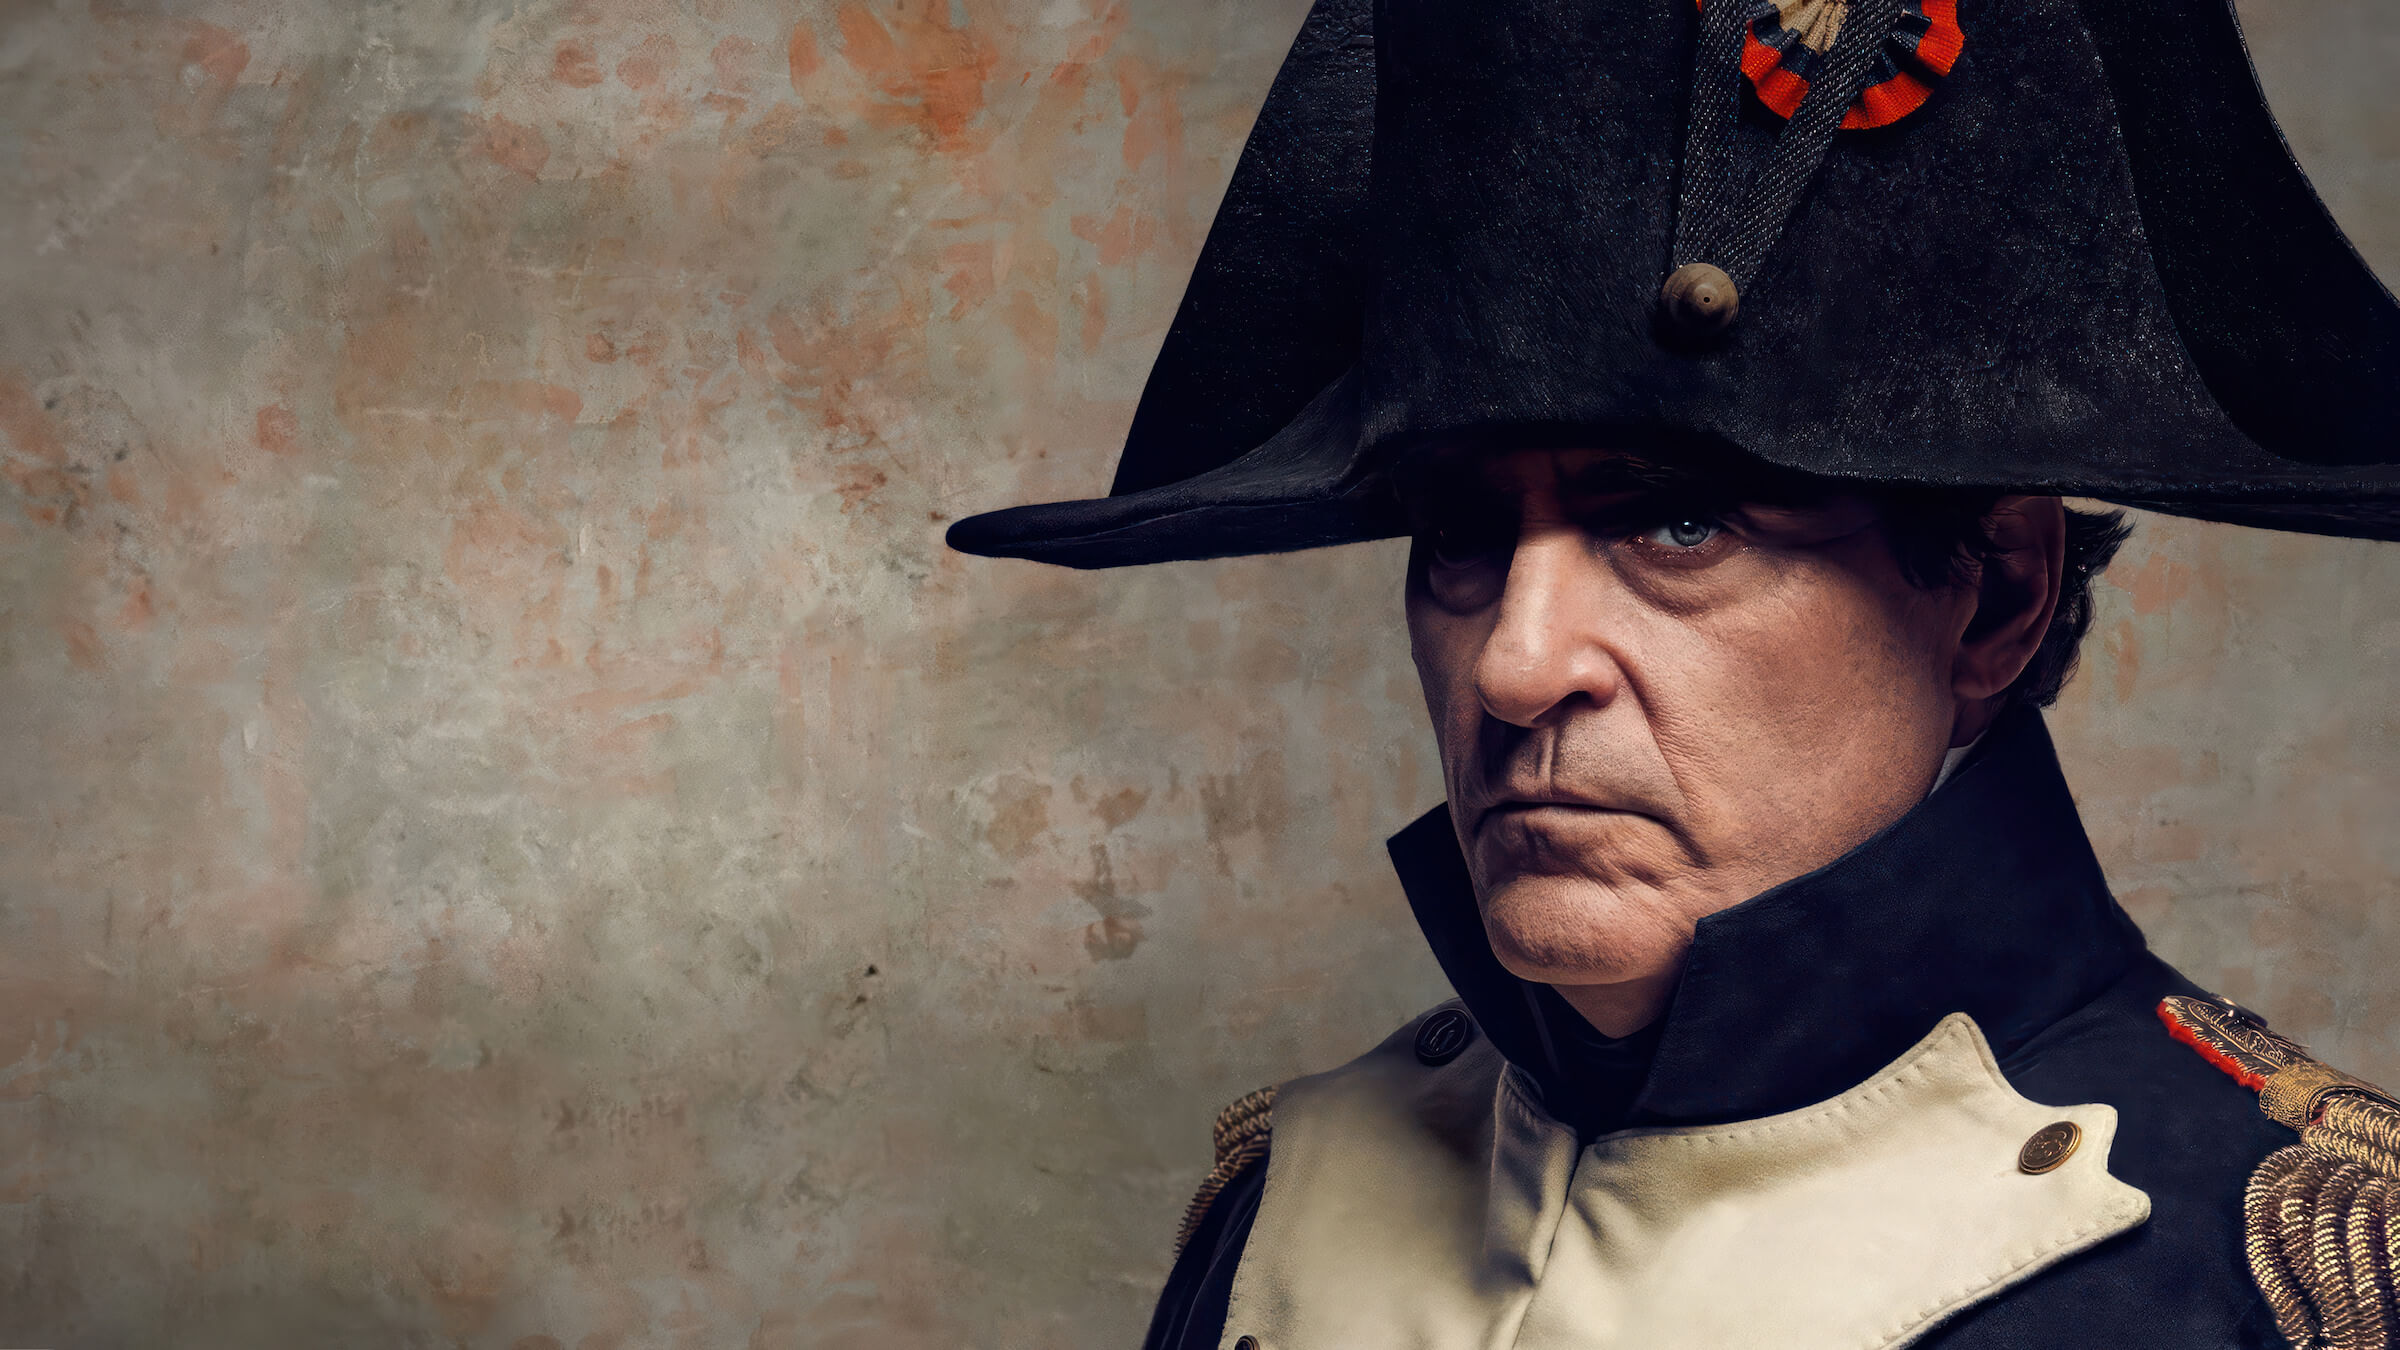 5 Lessons on Writing a Biopic from Ridley Scott’s 'Napoleon'